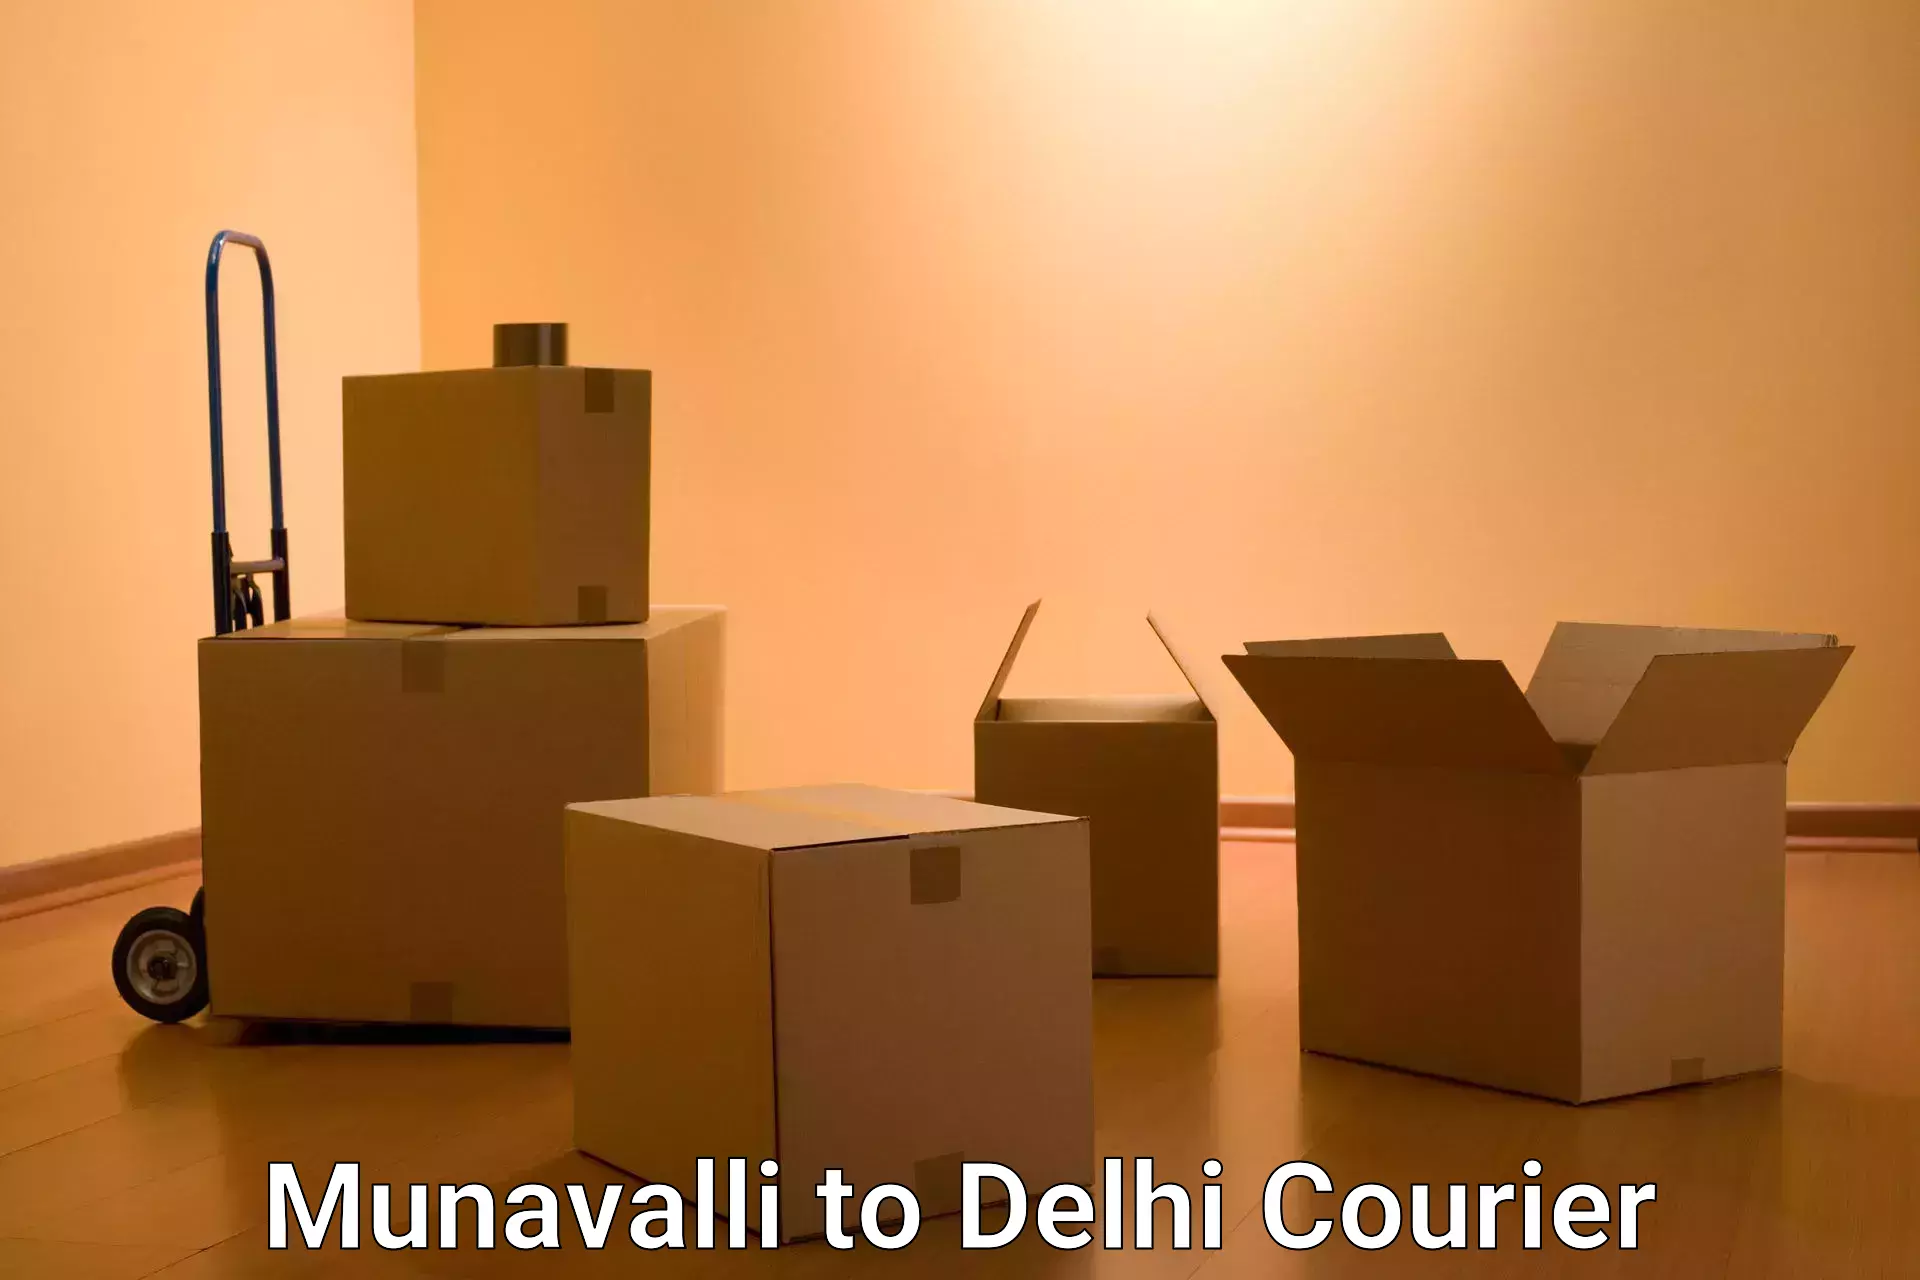 Flexible delivery schedules Munavalli to Lodhi Road